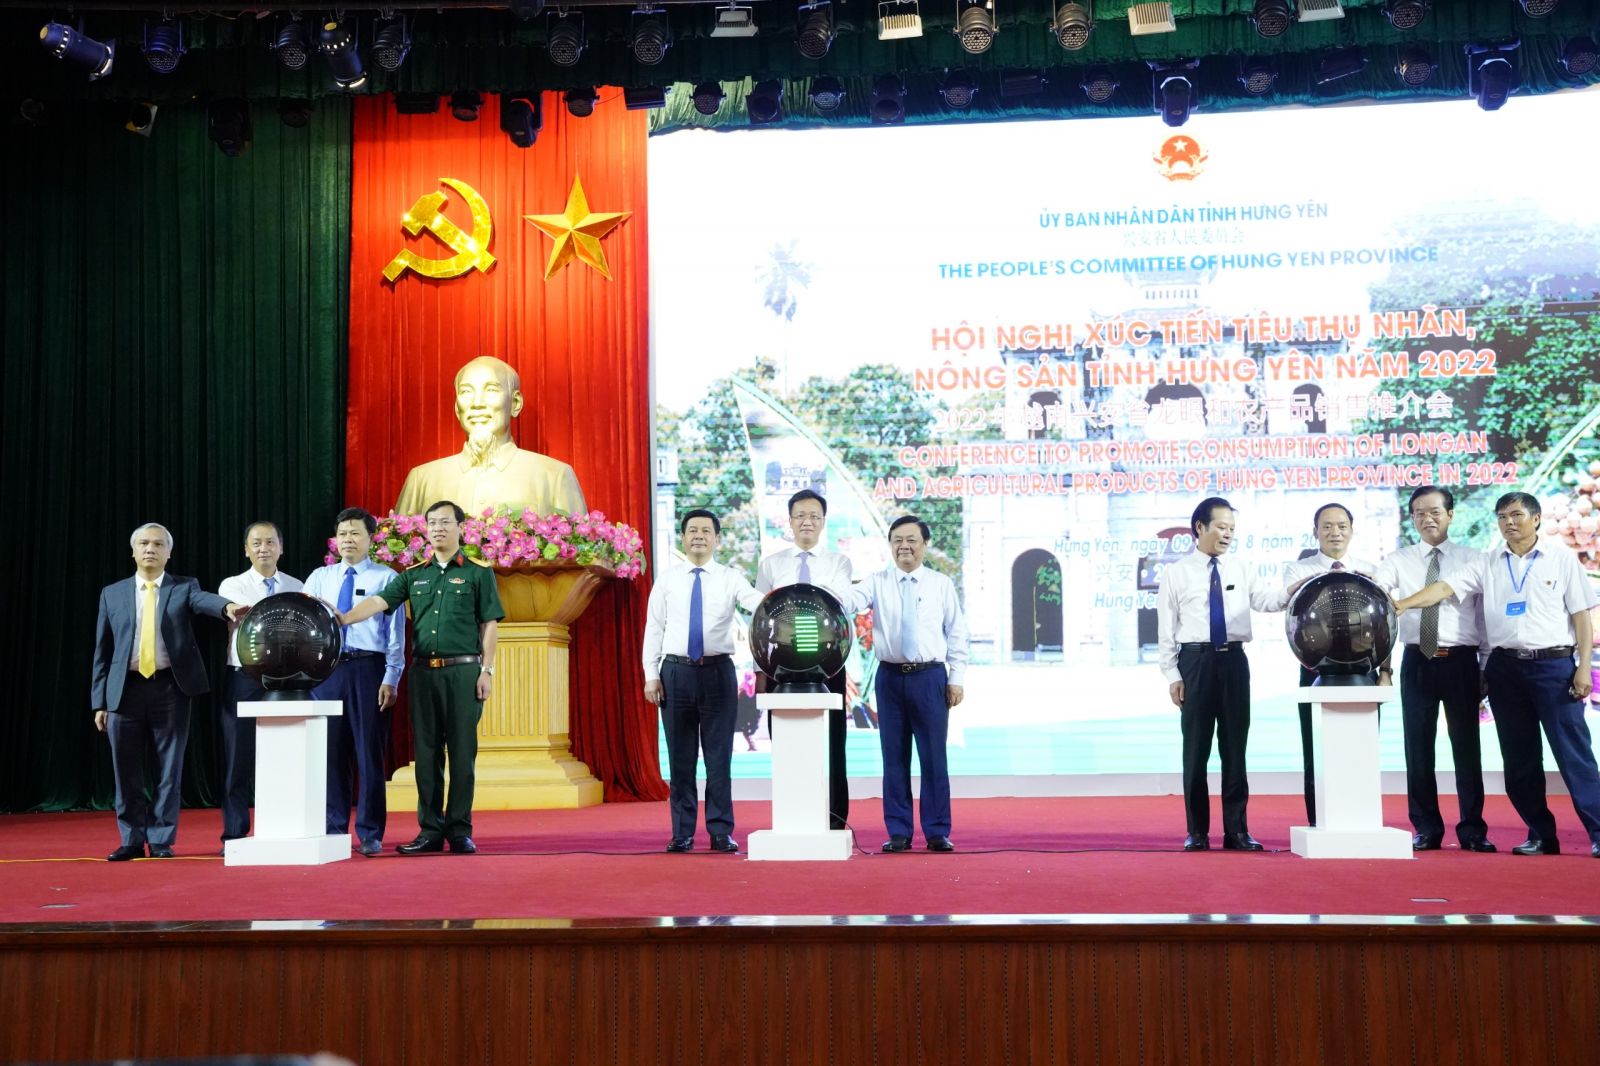 Conference to promote Hưng Yen’s longan and agricultural products